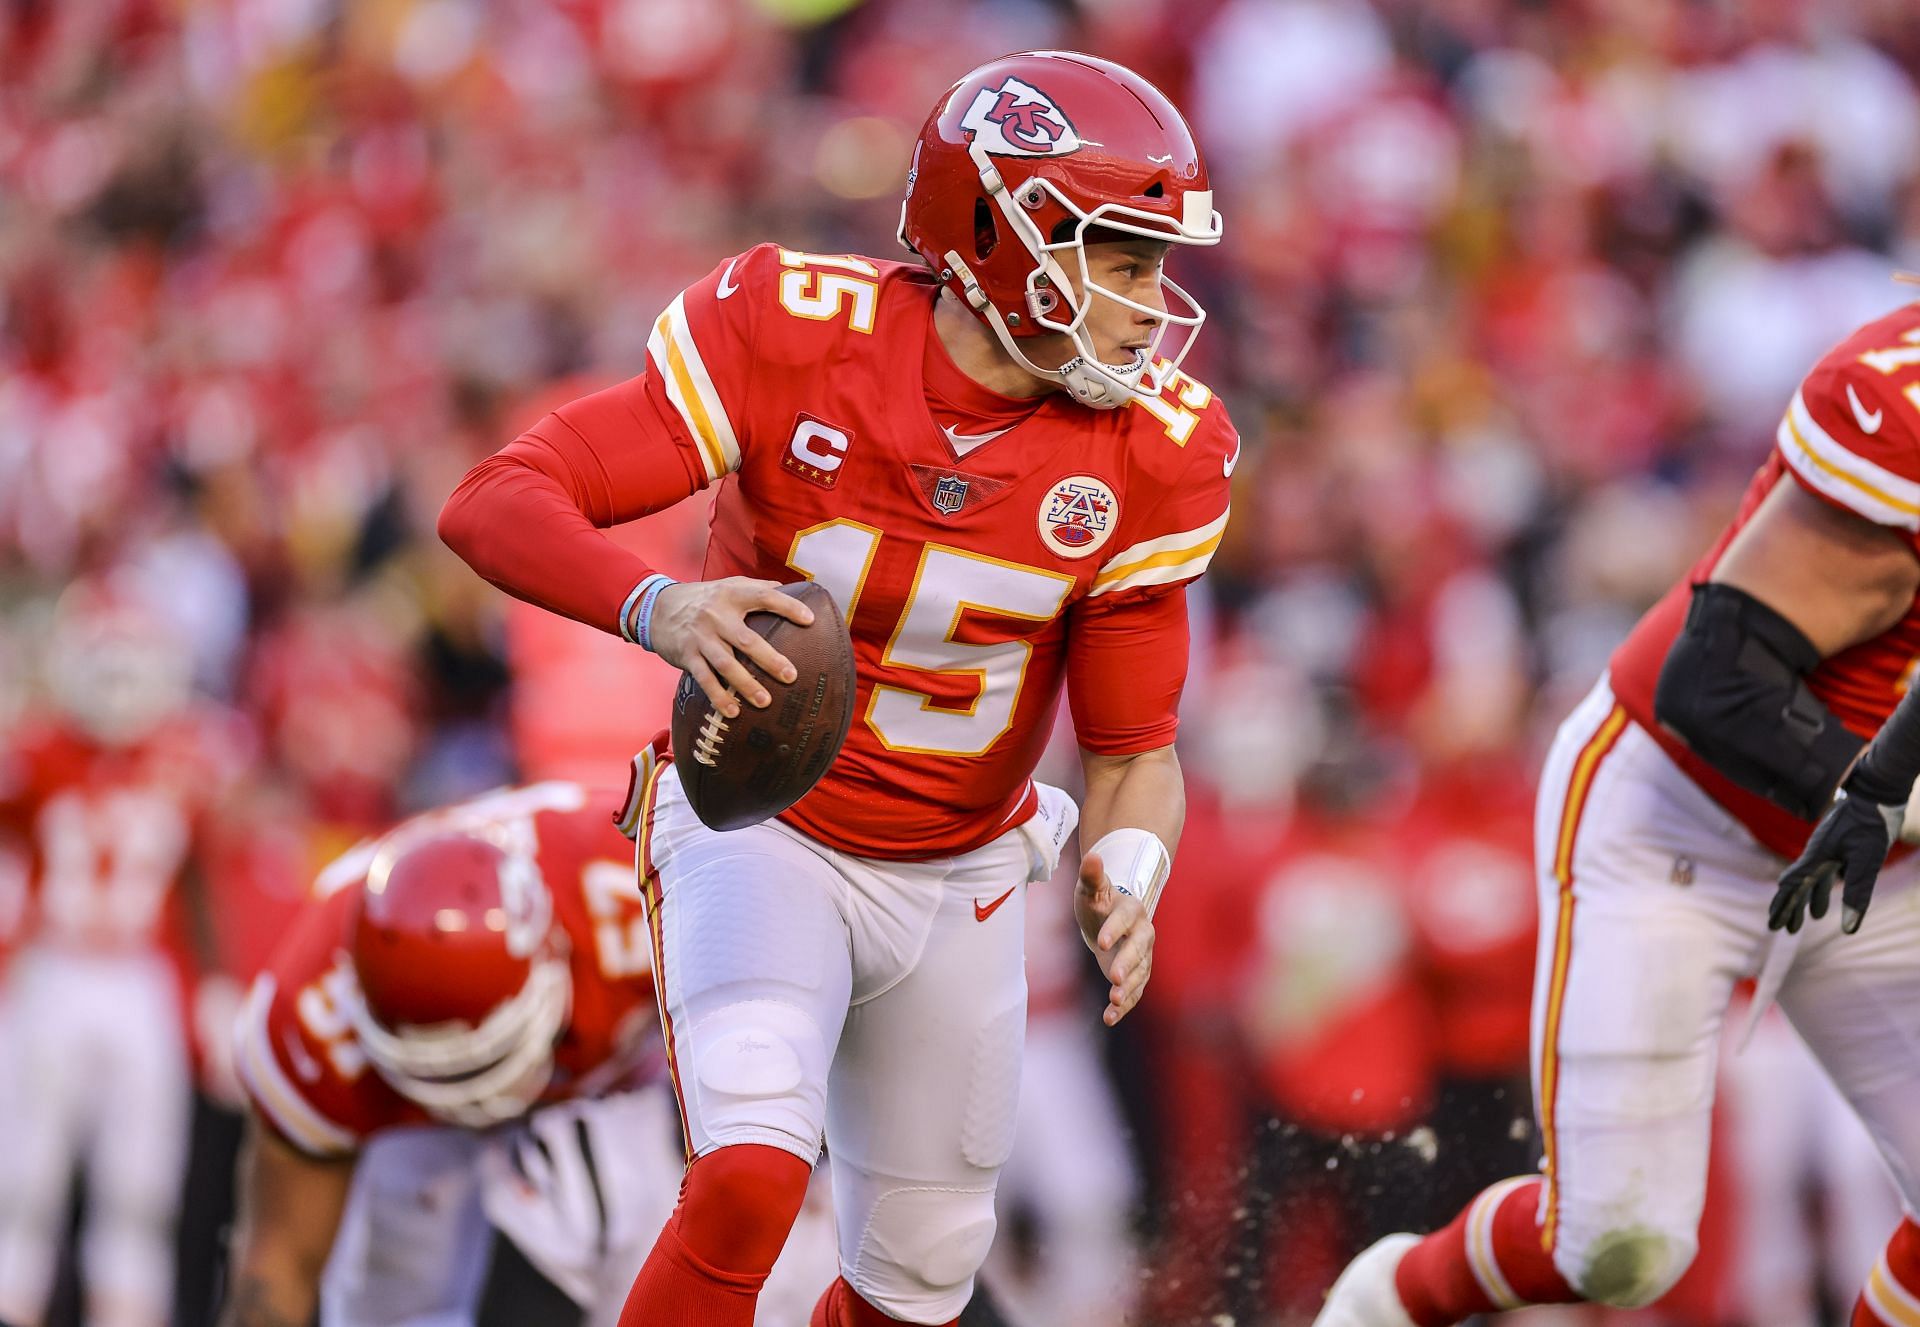 The Chiefs are no lock to make the playoffs after the upcoming 2022 NFL season.